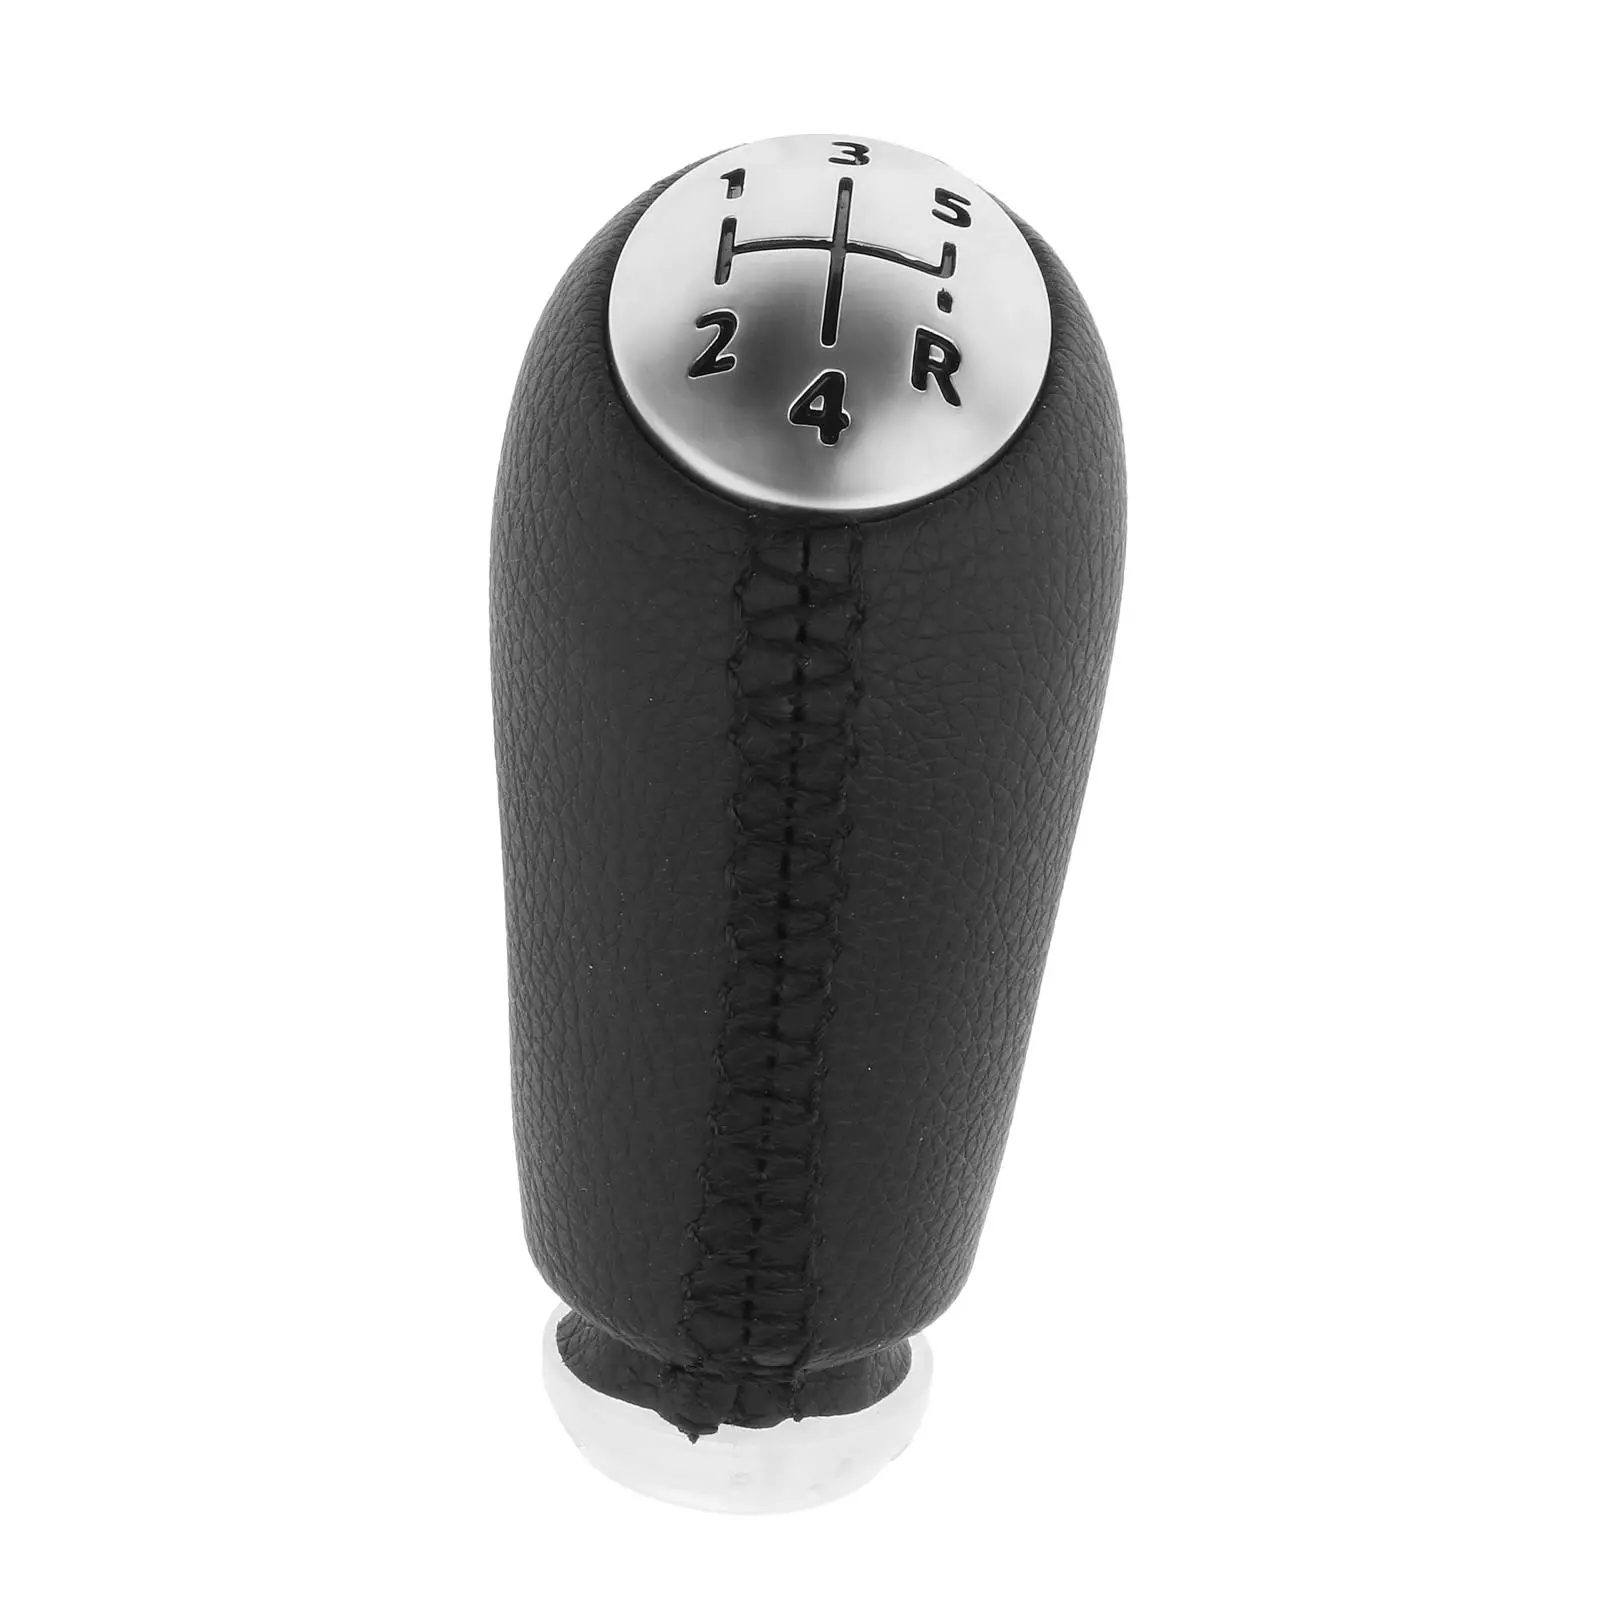 Auto Manual Round Gear Shifter Knob 110mm for   2005-2012, Lightweight and Sturdy